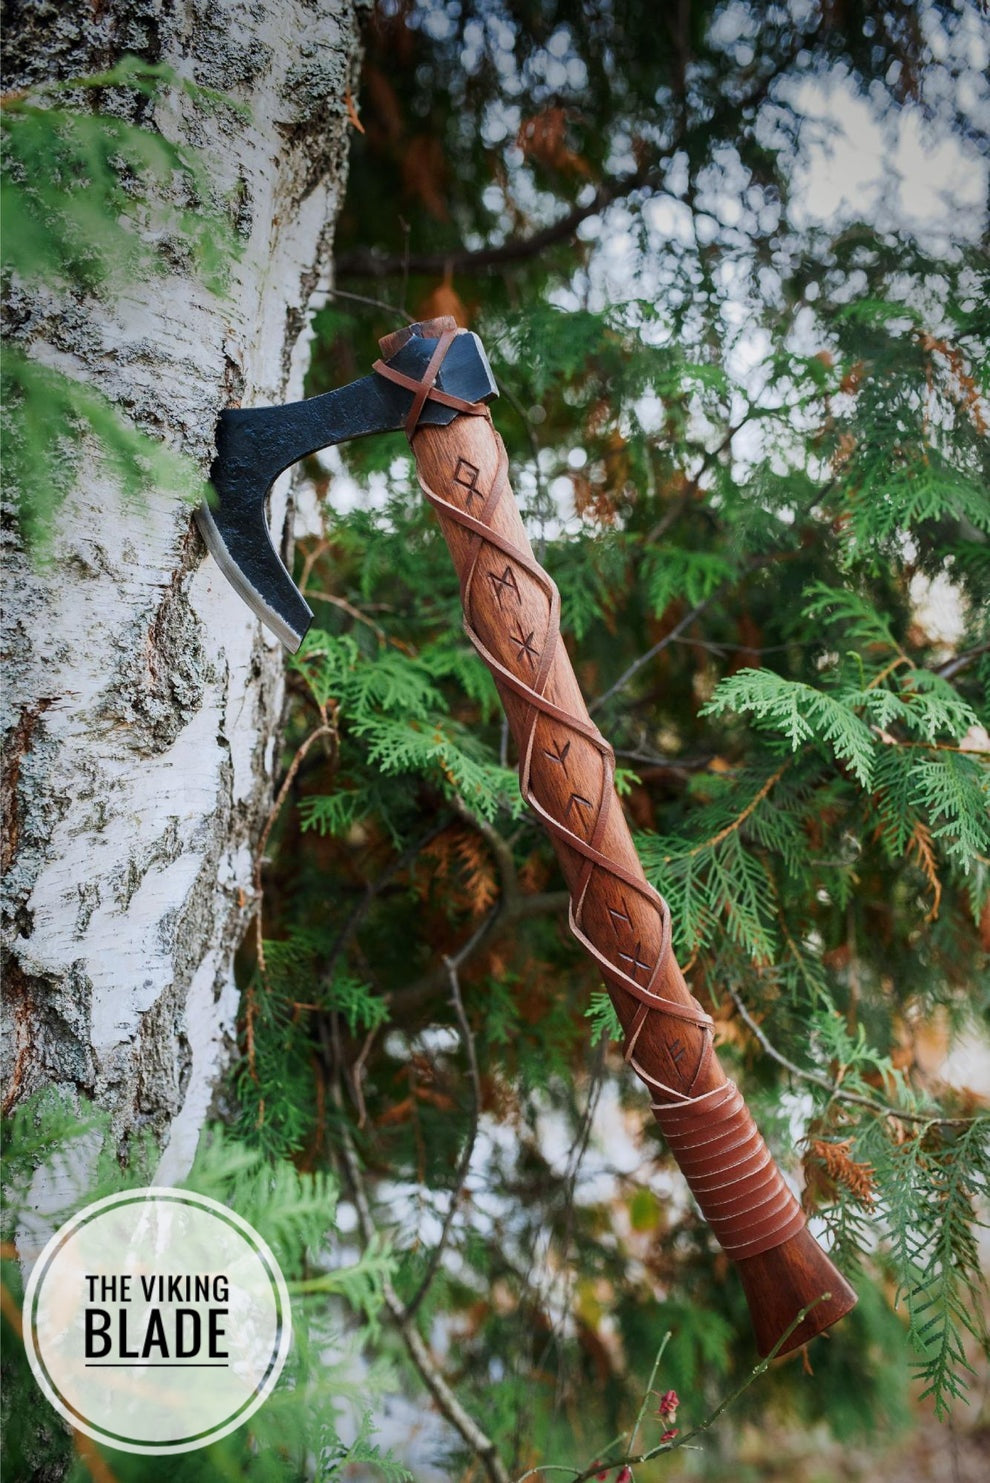 Custom Handmade Carbon Steel Long Bearded Viking Axe Runes Carved On Handle With Leather Sheath |The Viking Blade|